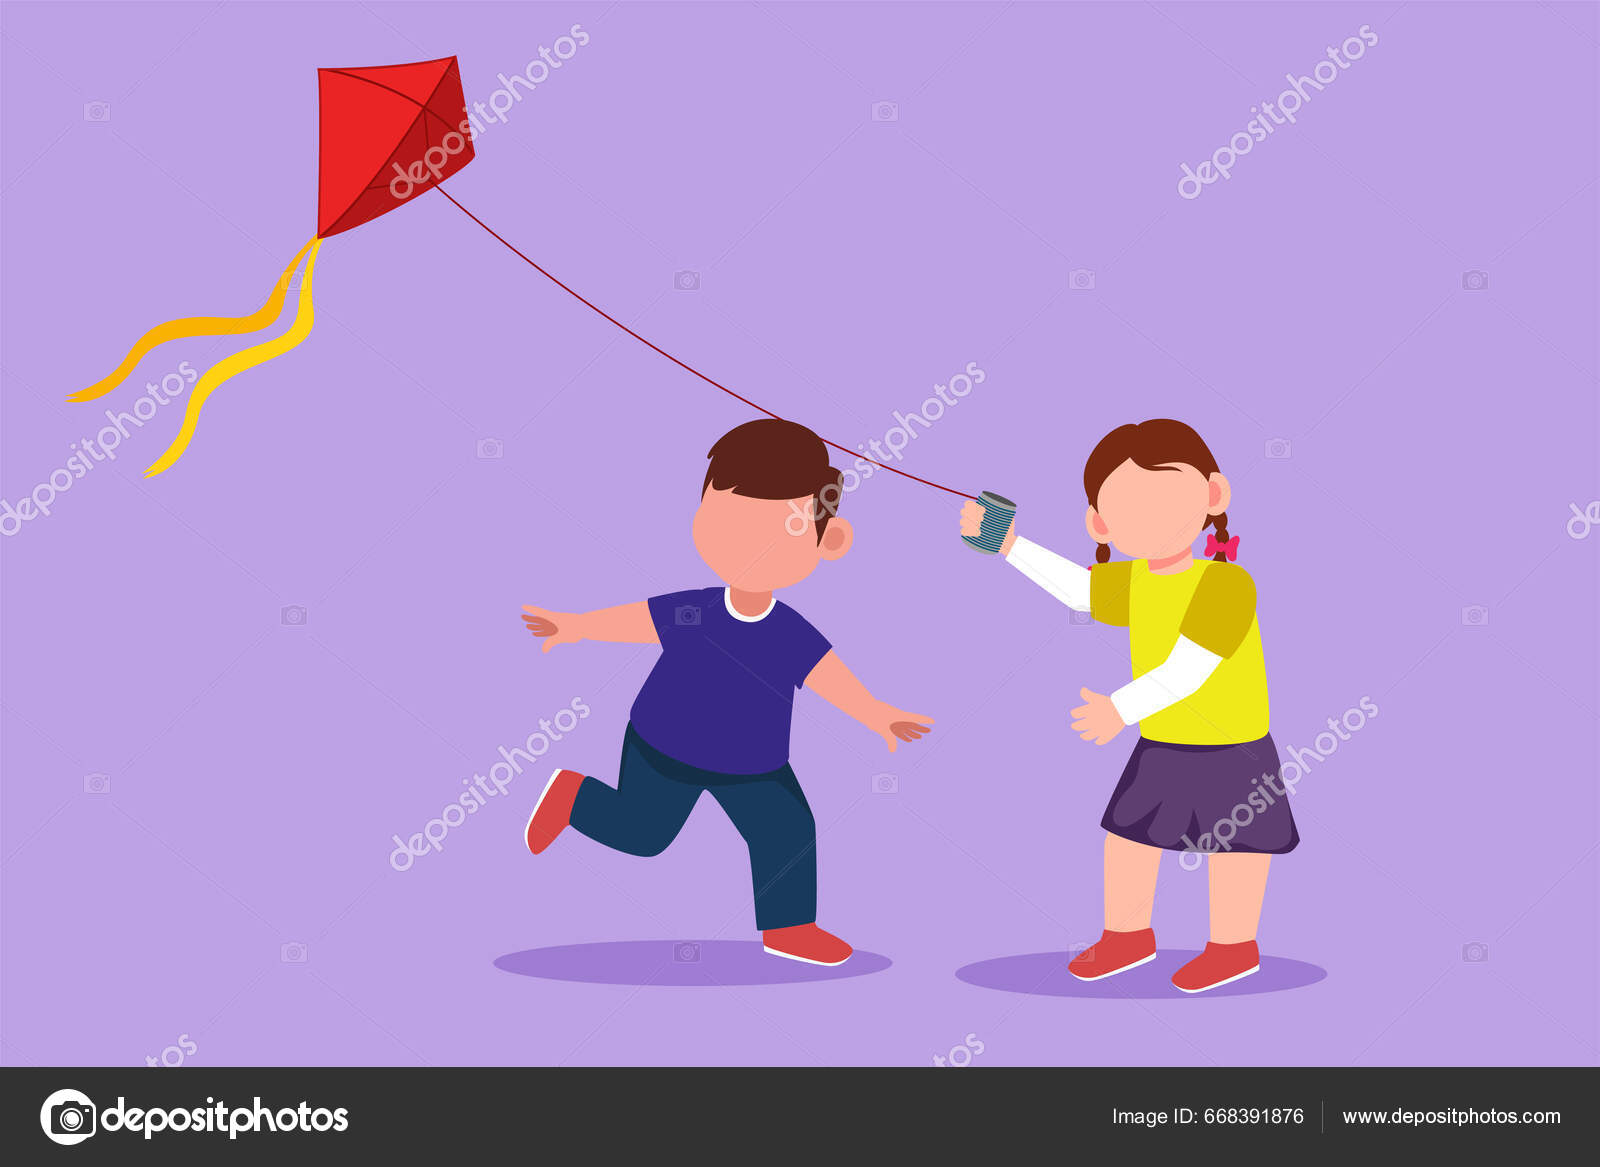 3d Kites Cliparts, Stock Vector and Royalty Free 3d Kites Illustrations